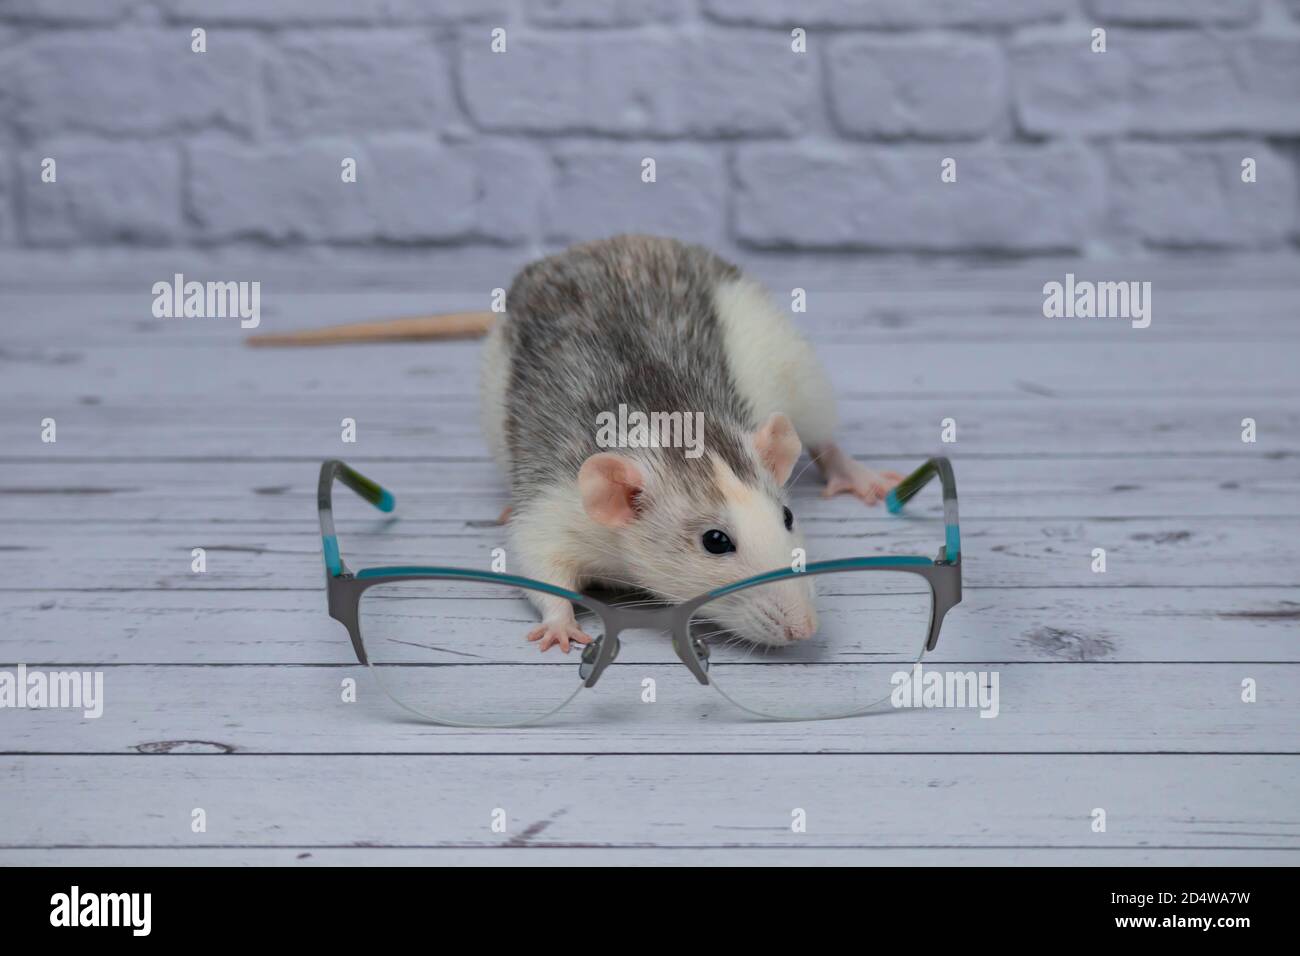 A cute rat sits next to glasses with transparent glasses. Clever rodent. Stock Photo